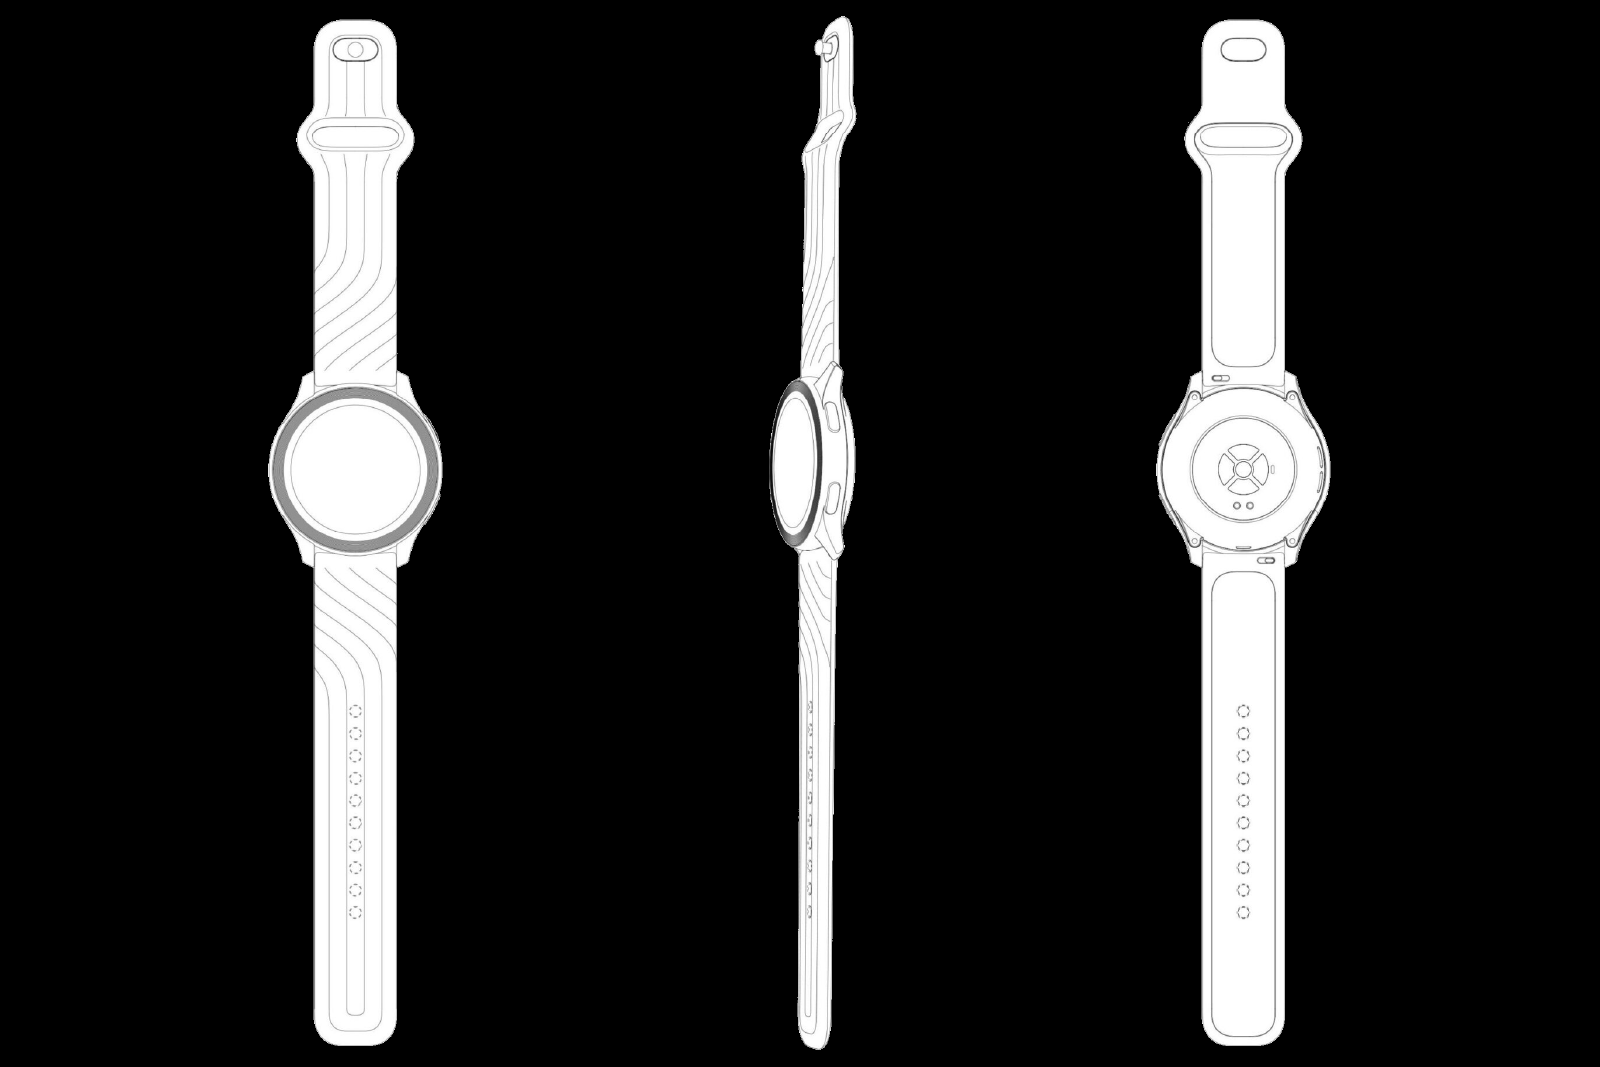 Leaked OnePlus Watch sketches reveal two potential designs